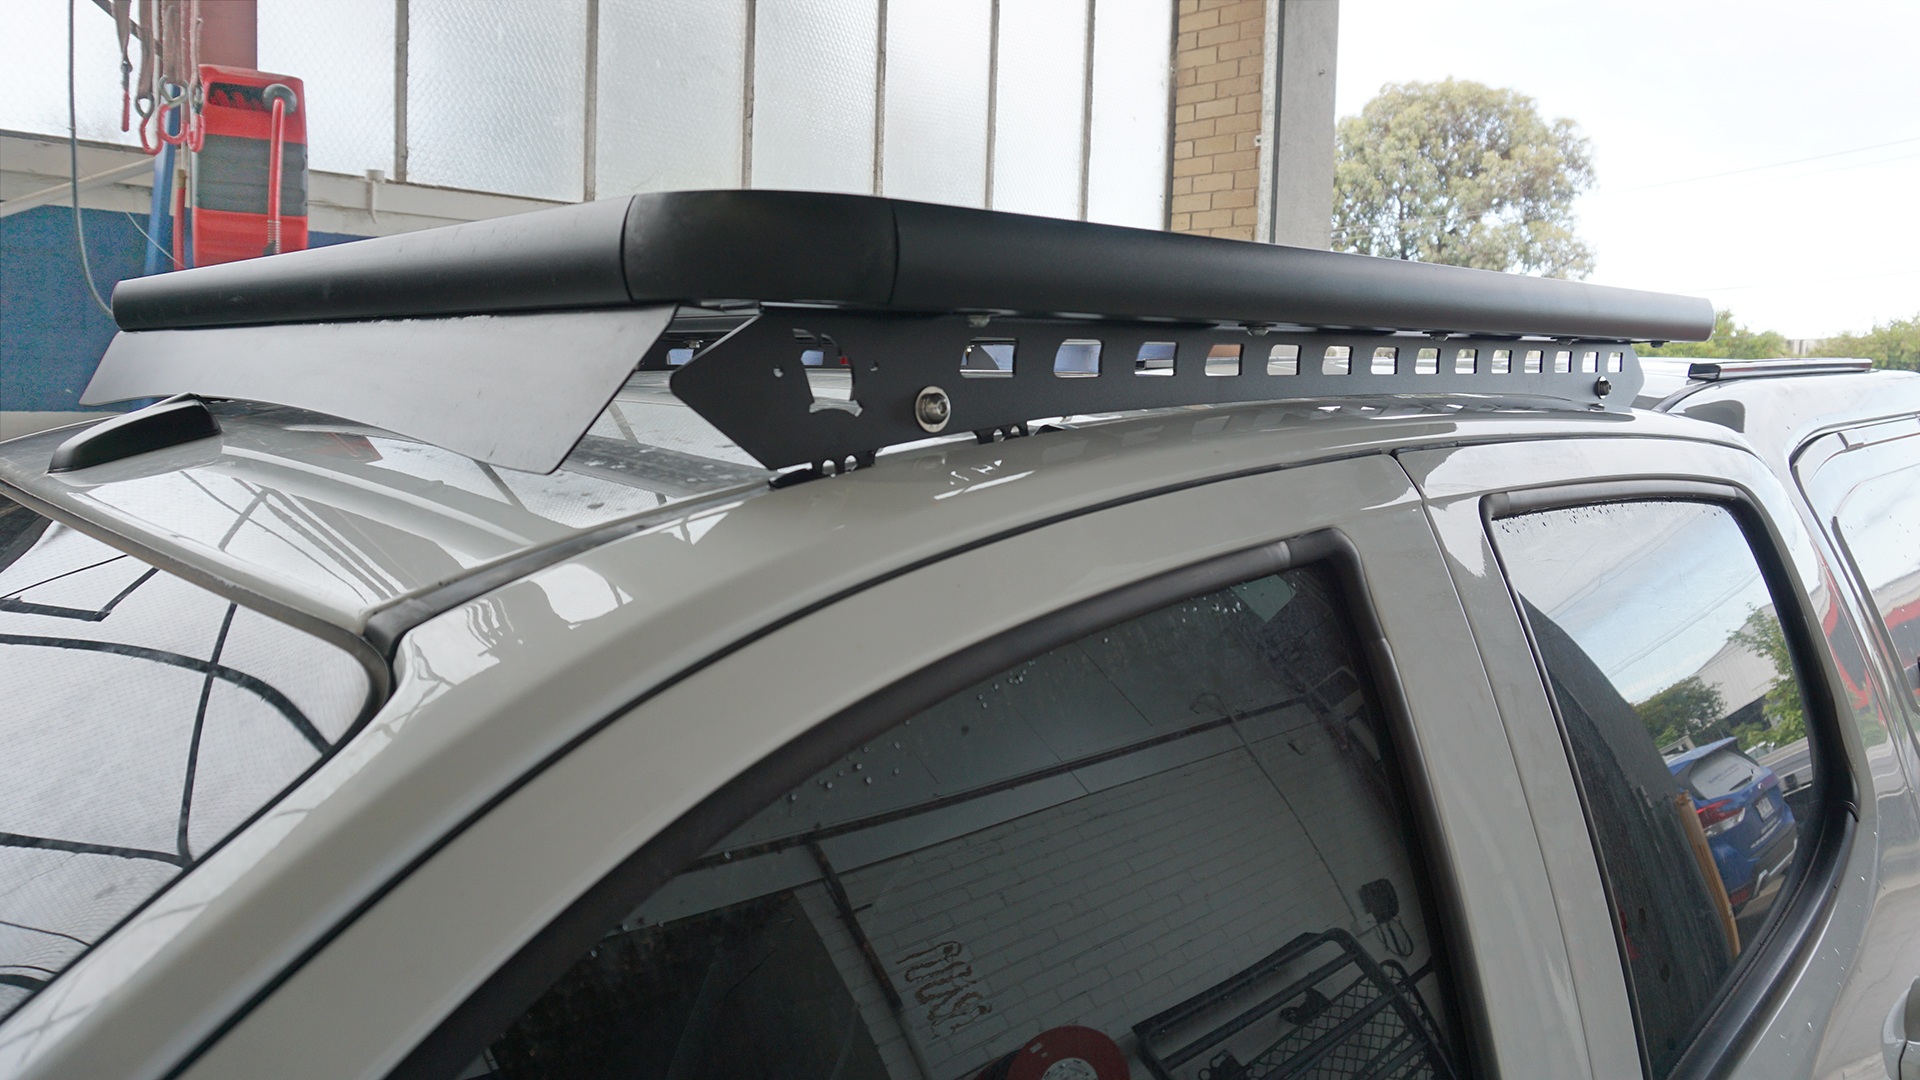 Holden Colorado dual cab ute with a Wedgetail roof rack installed.